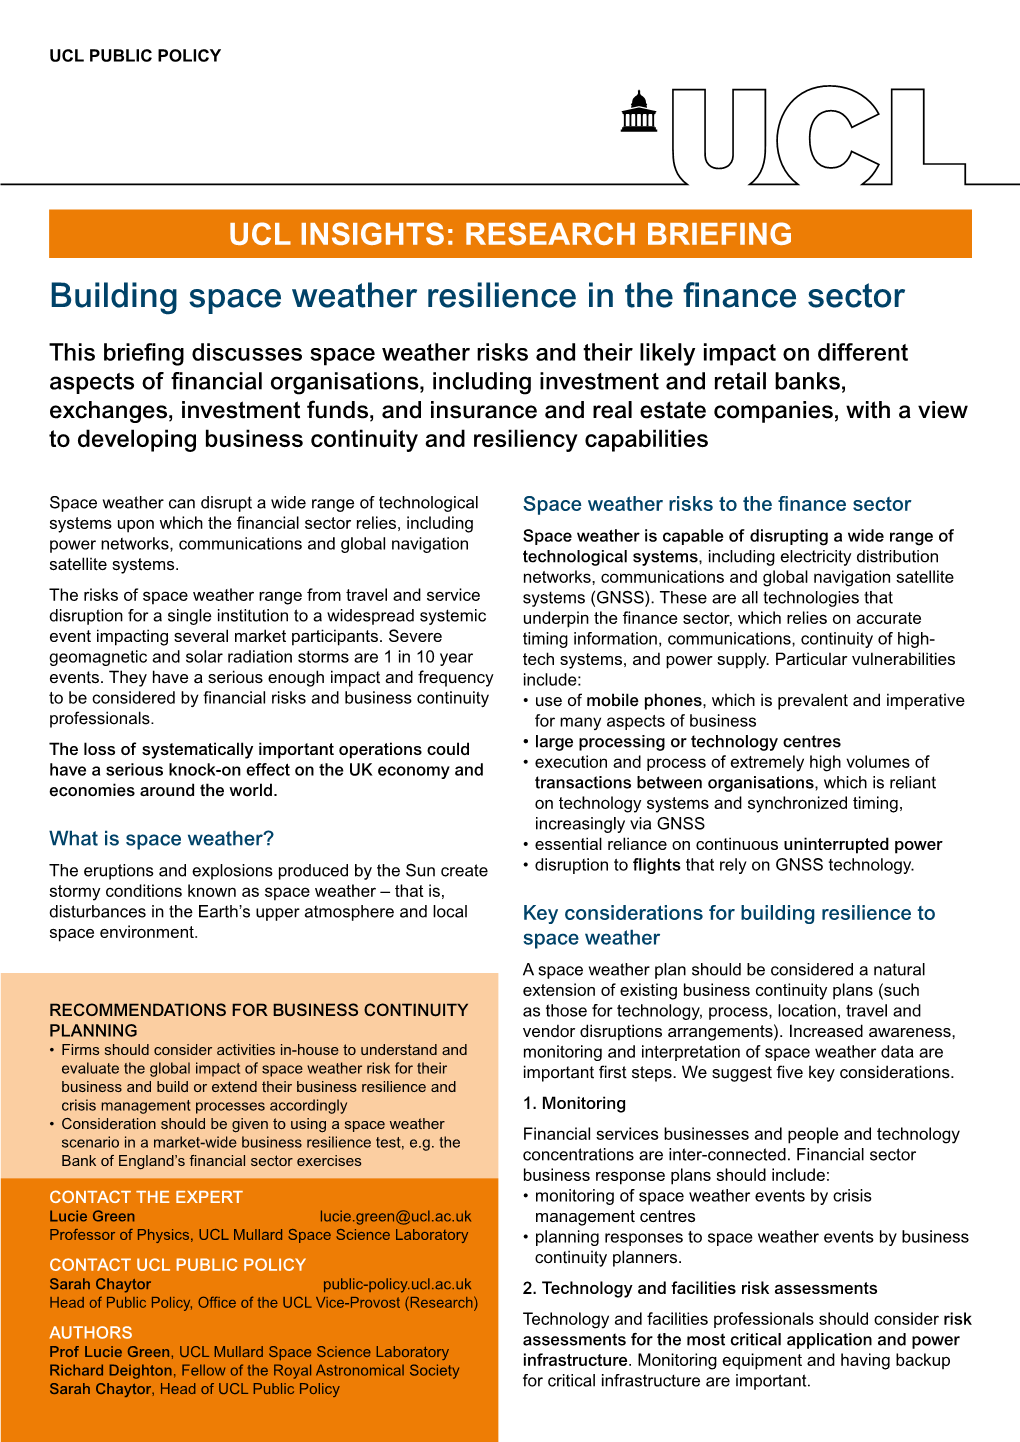 Building Space Weather Resilience in the Finance Sector